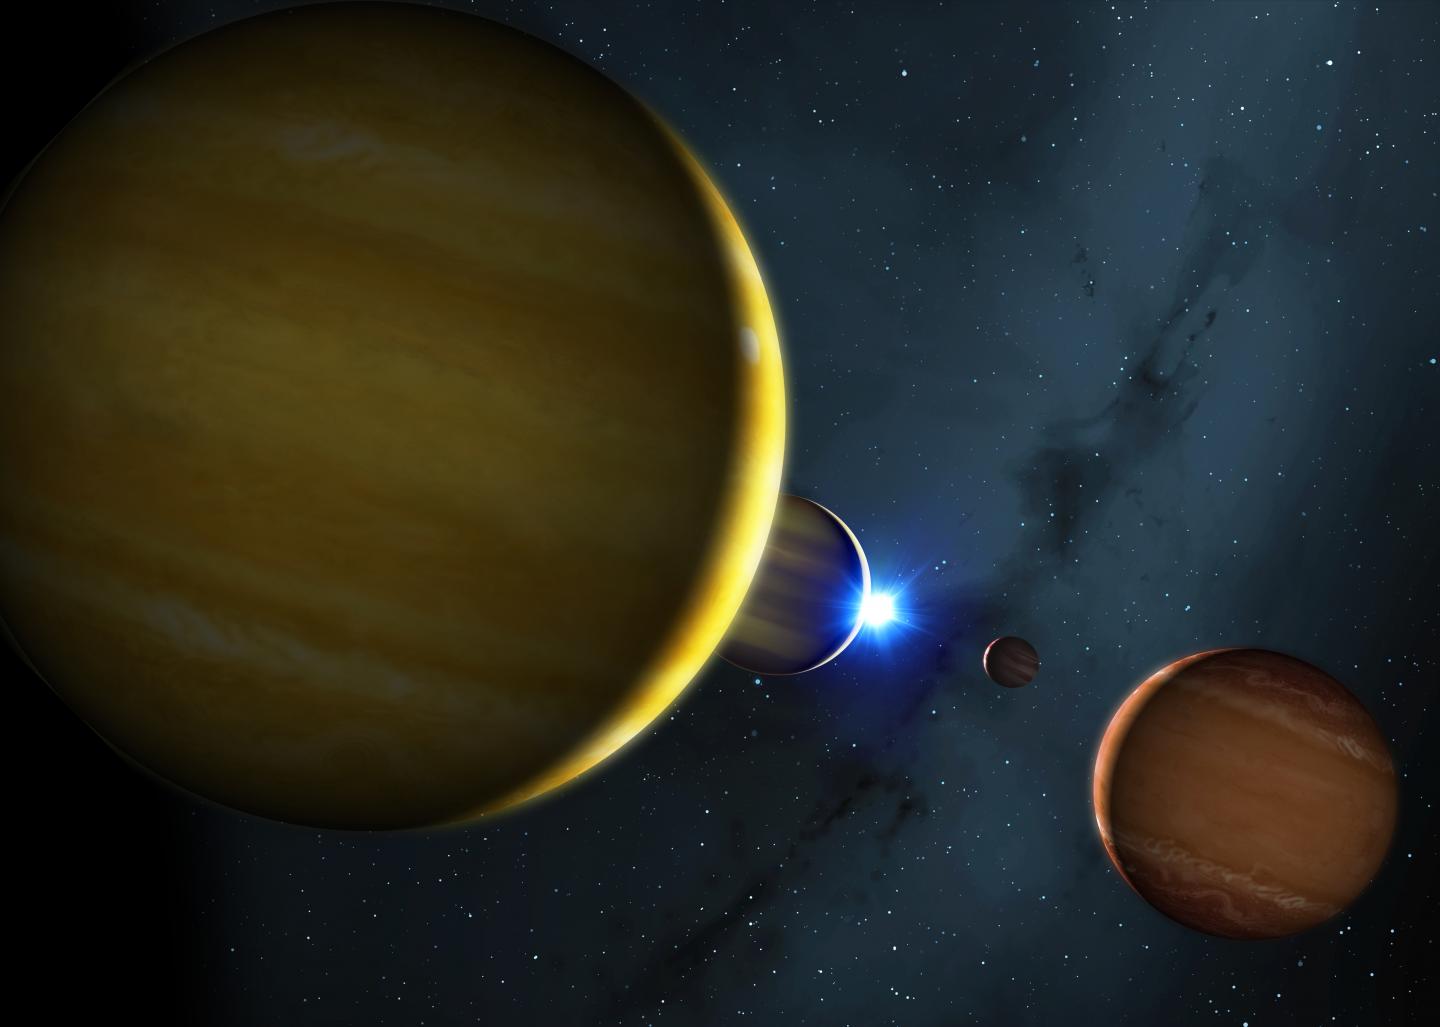 Artist's Impression of the Four Planets of the HR 8799 System and Its Star